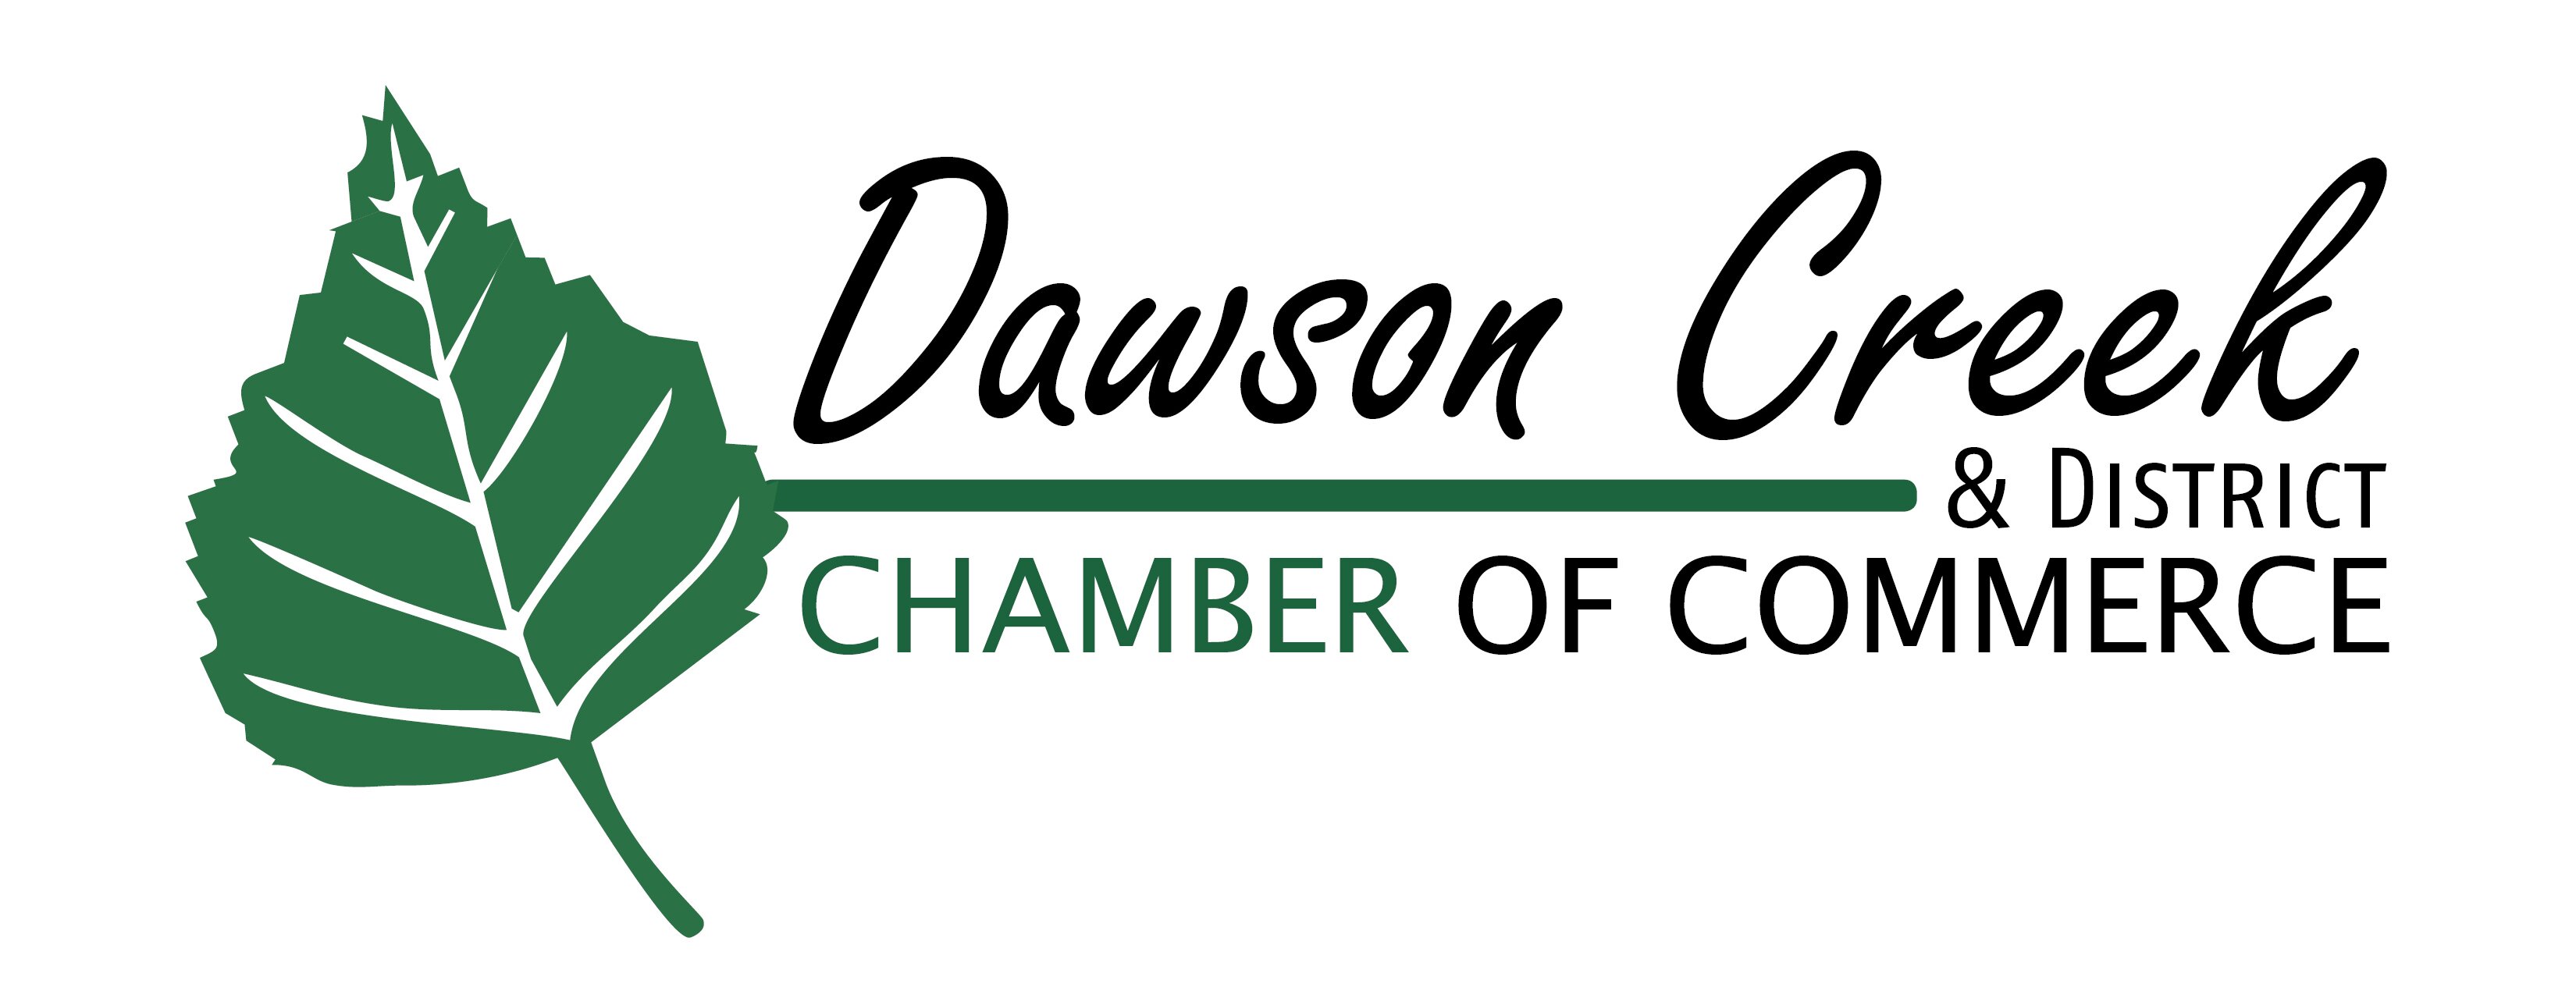 Promoting and protecting the economic and social prosperity of Dawson Creek and District.